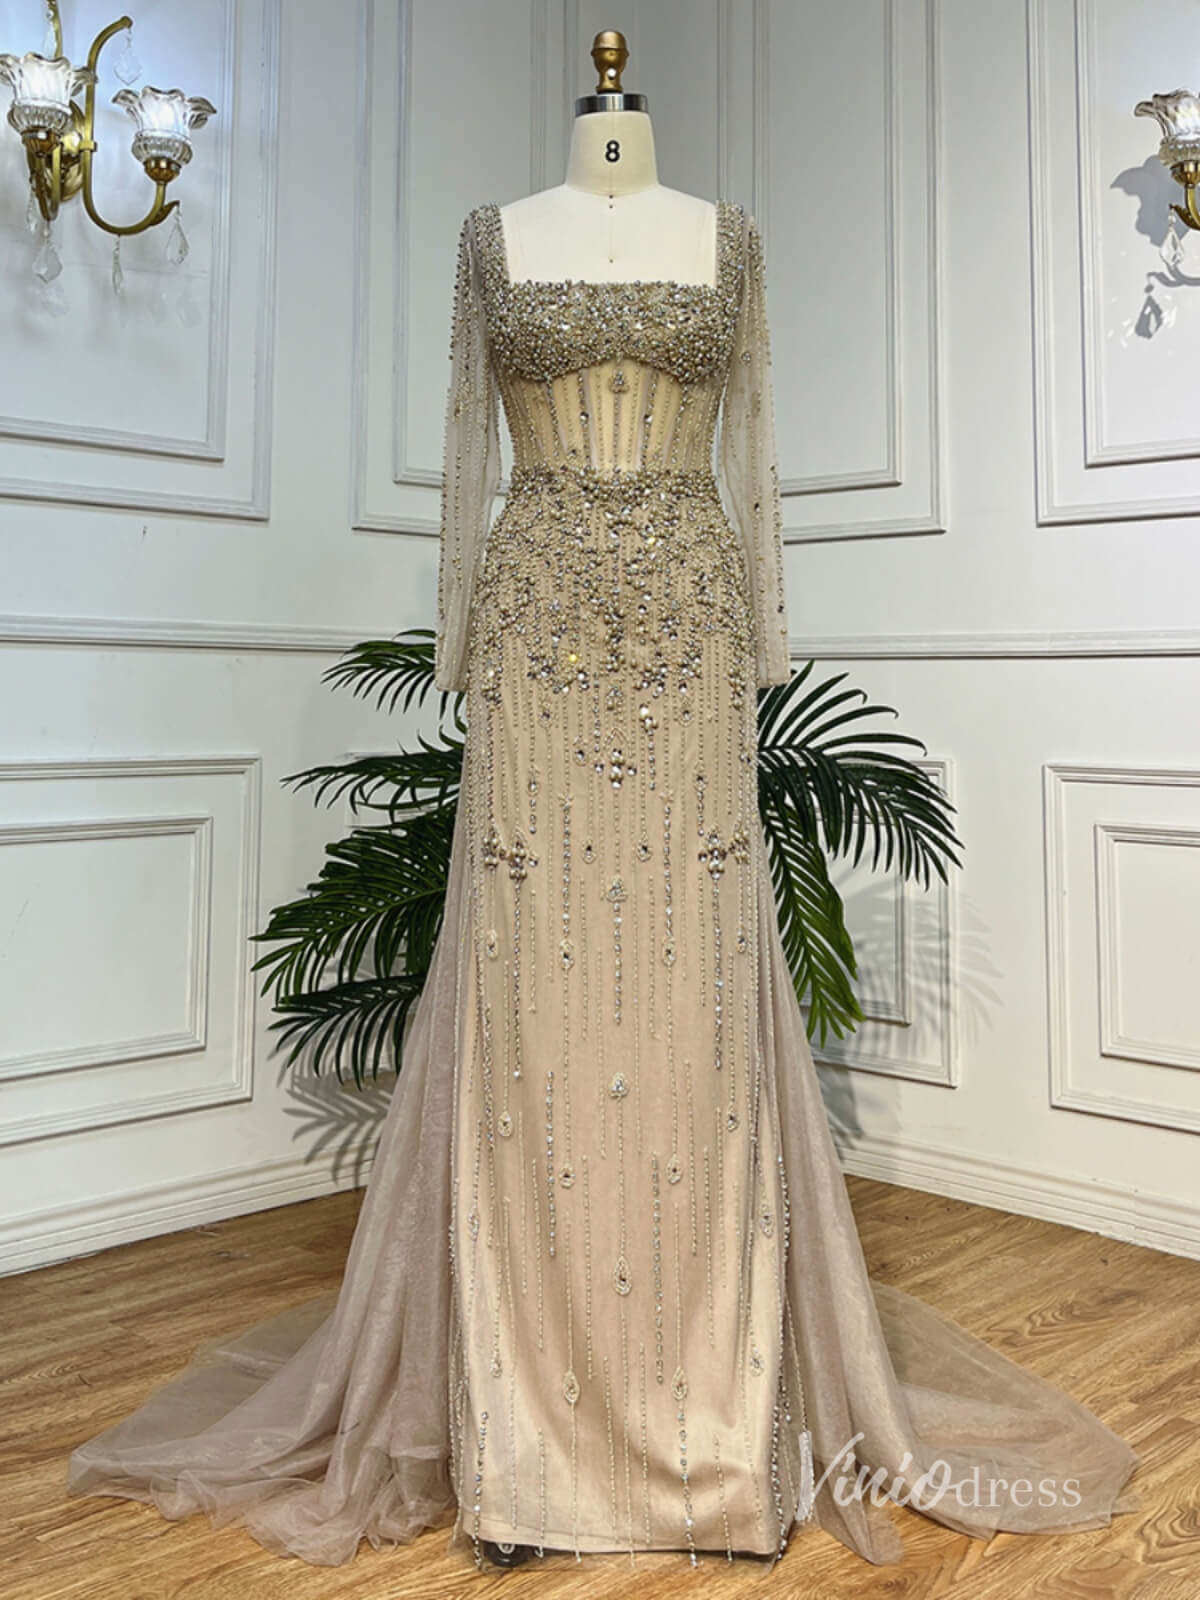 Khaki Beaded Long Sleeve Evening Dresses with Overskirt Mother of the Bride Dresses AD1124-prom dresses-Viniodress-Khaki-US 2-Viniodress